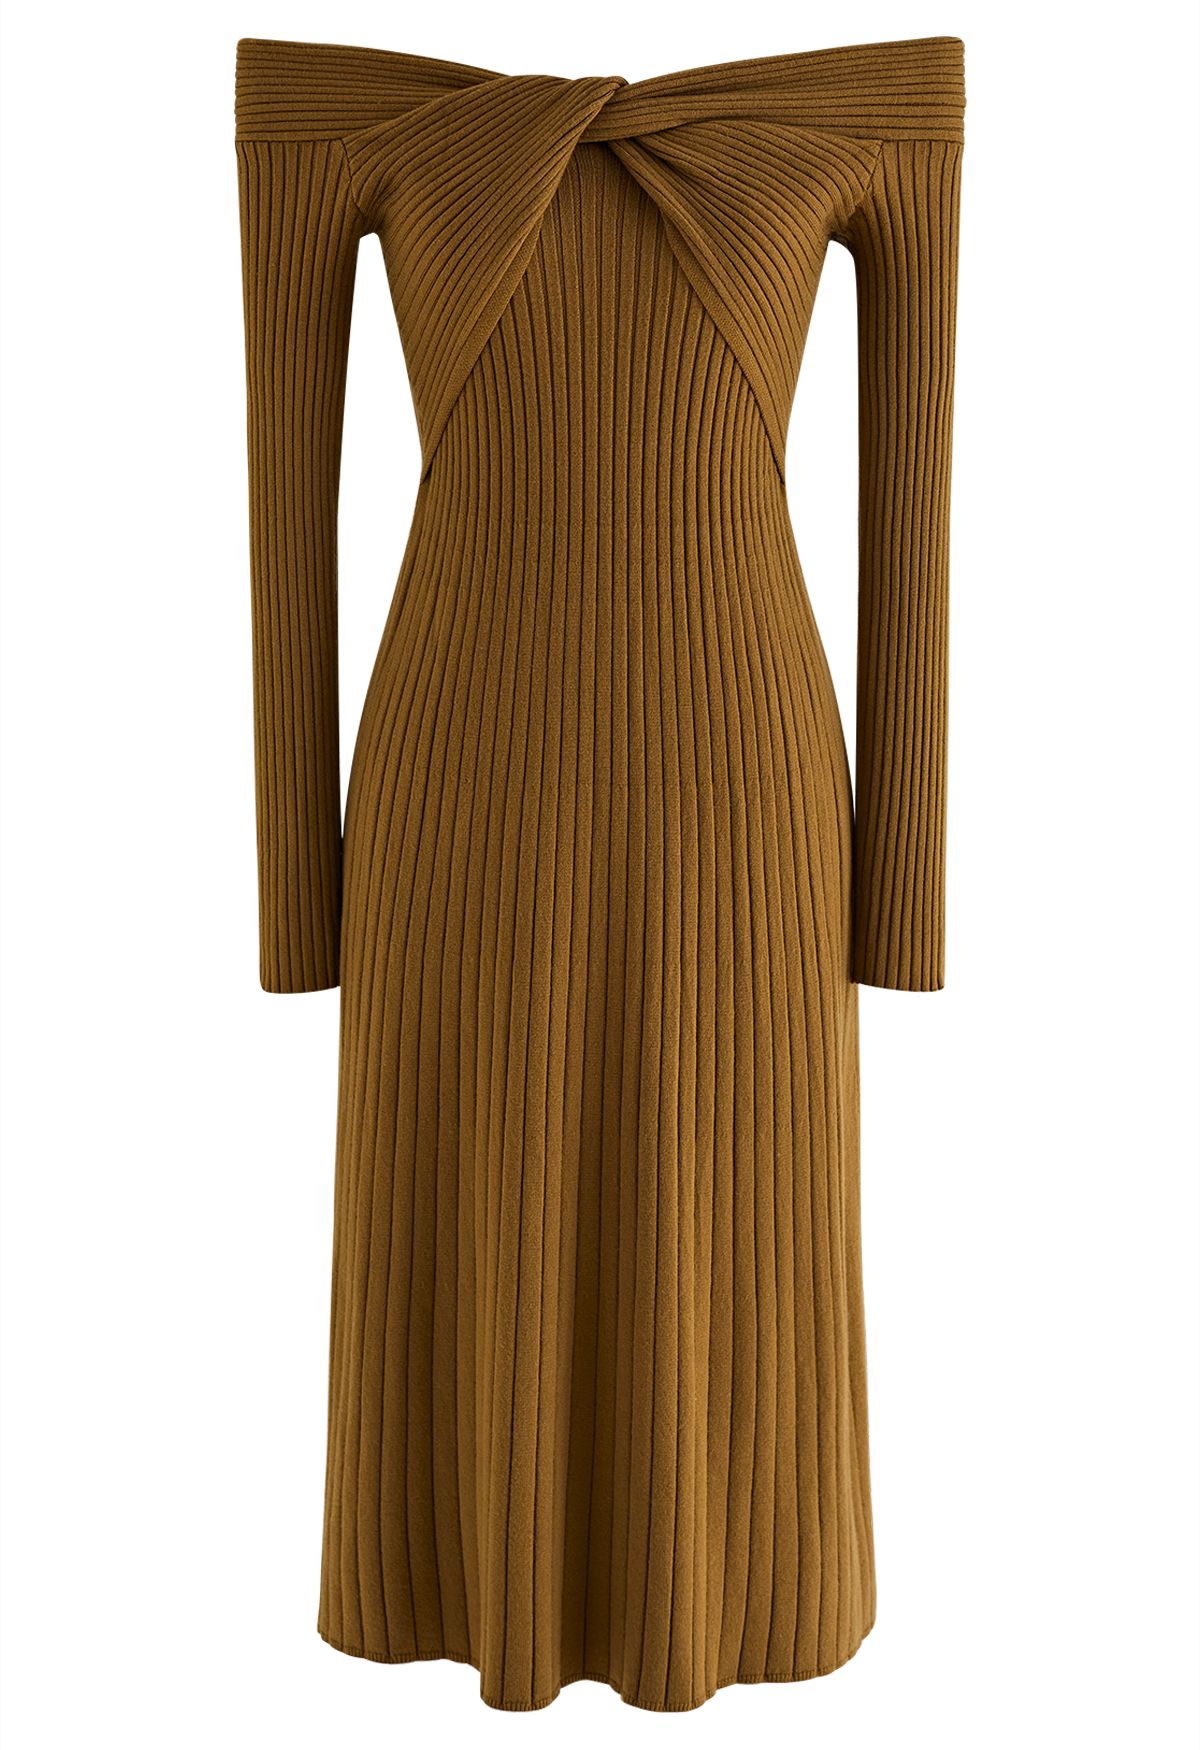 Twisted Off-Shoulder Ribbed Knit Dress in Mustard